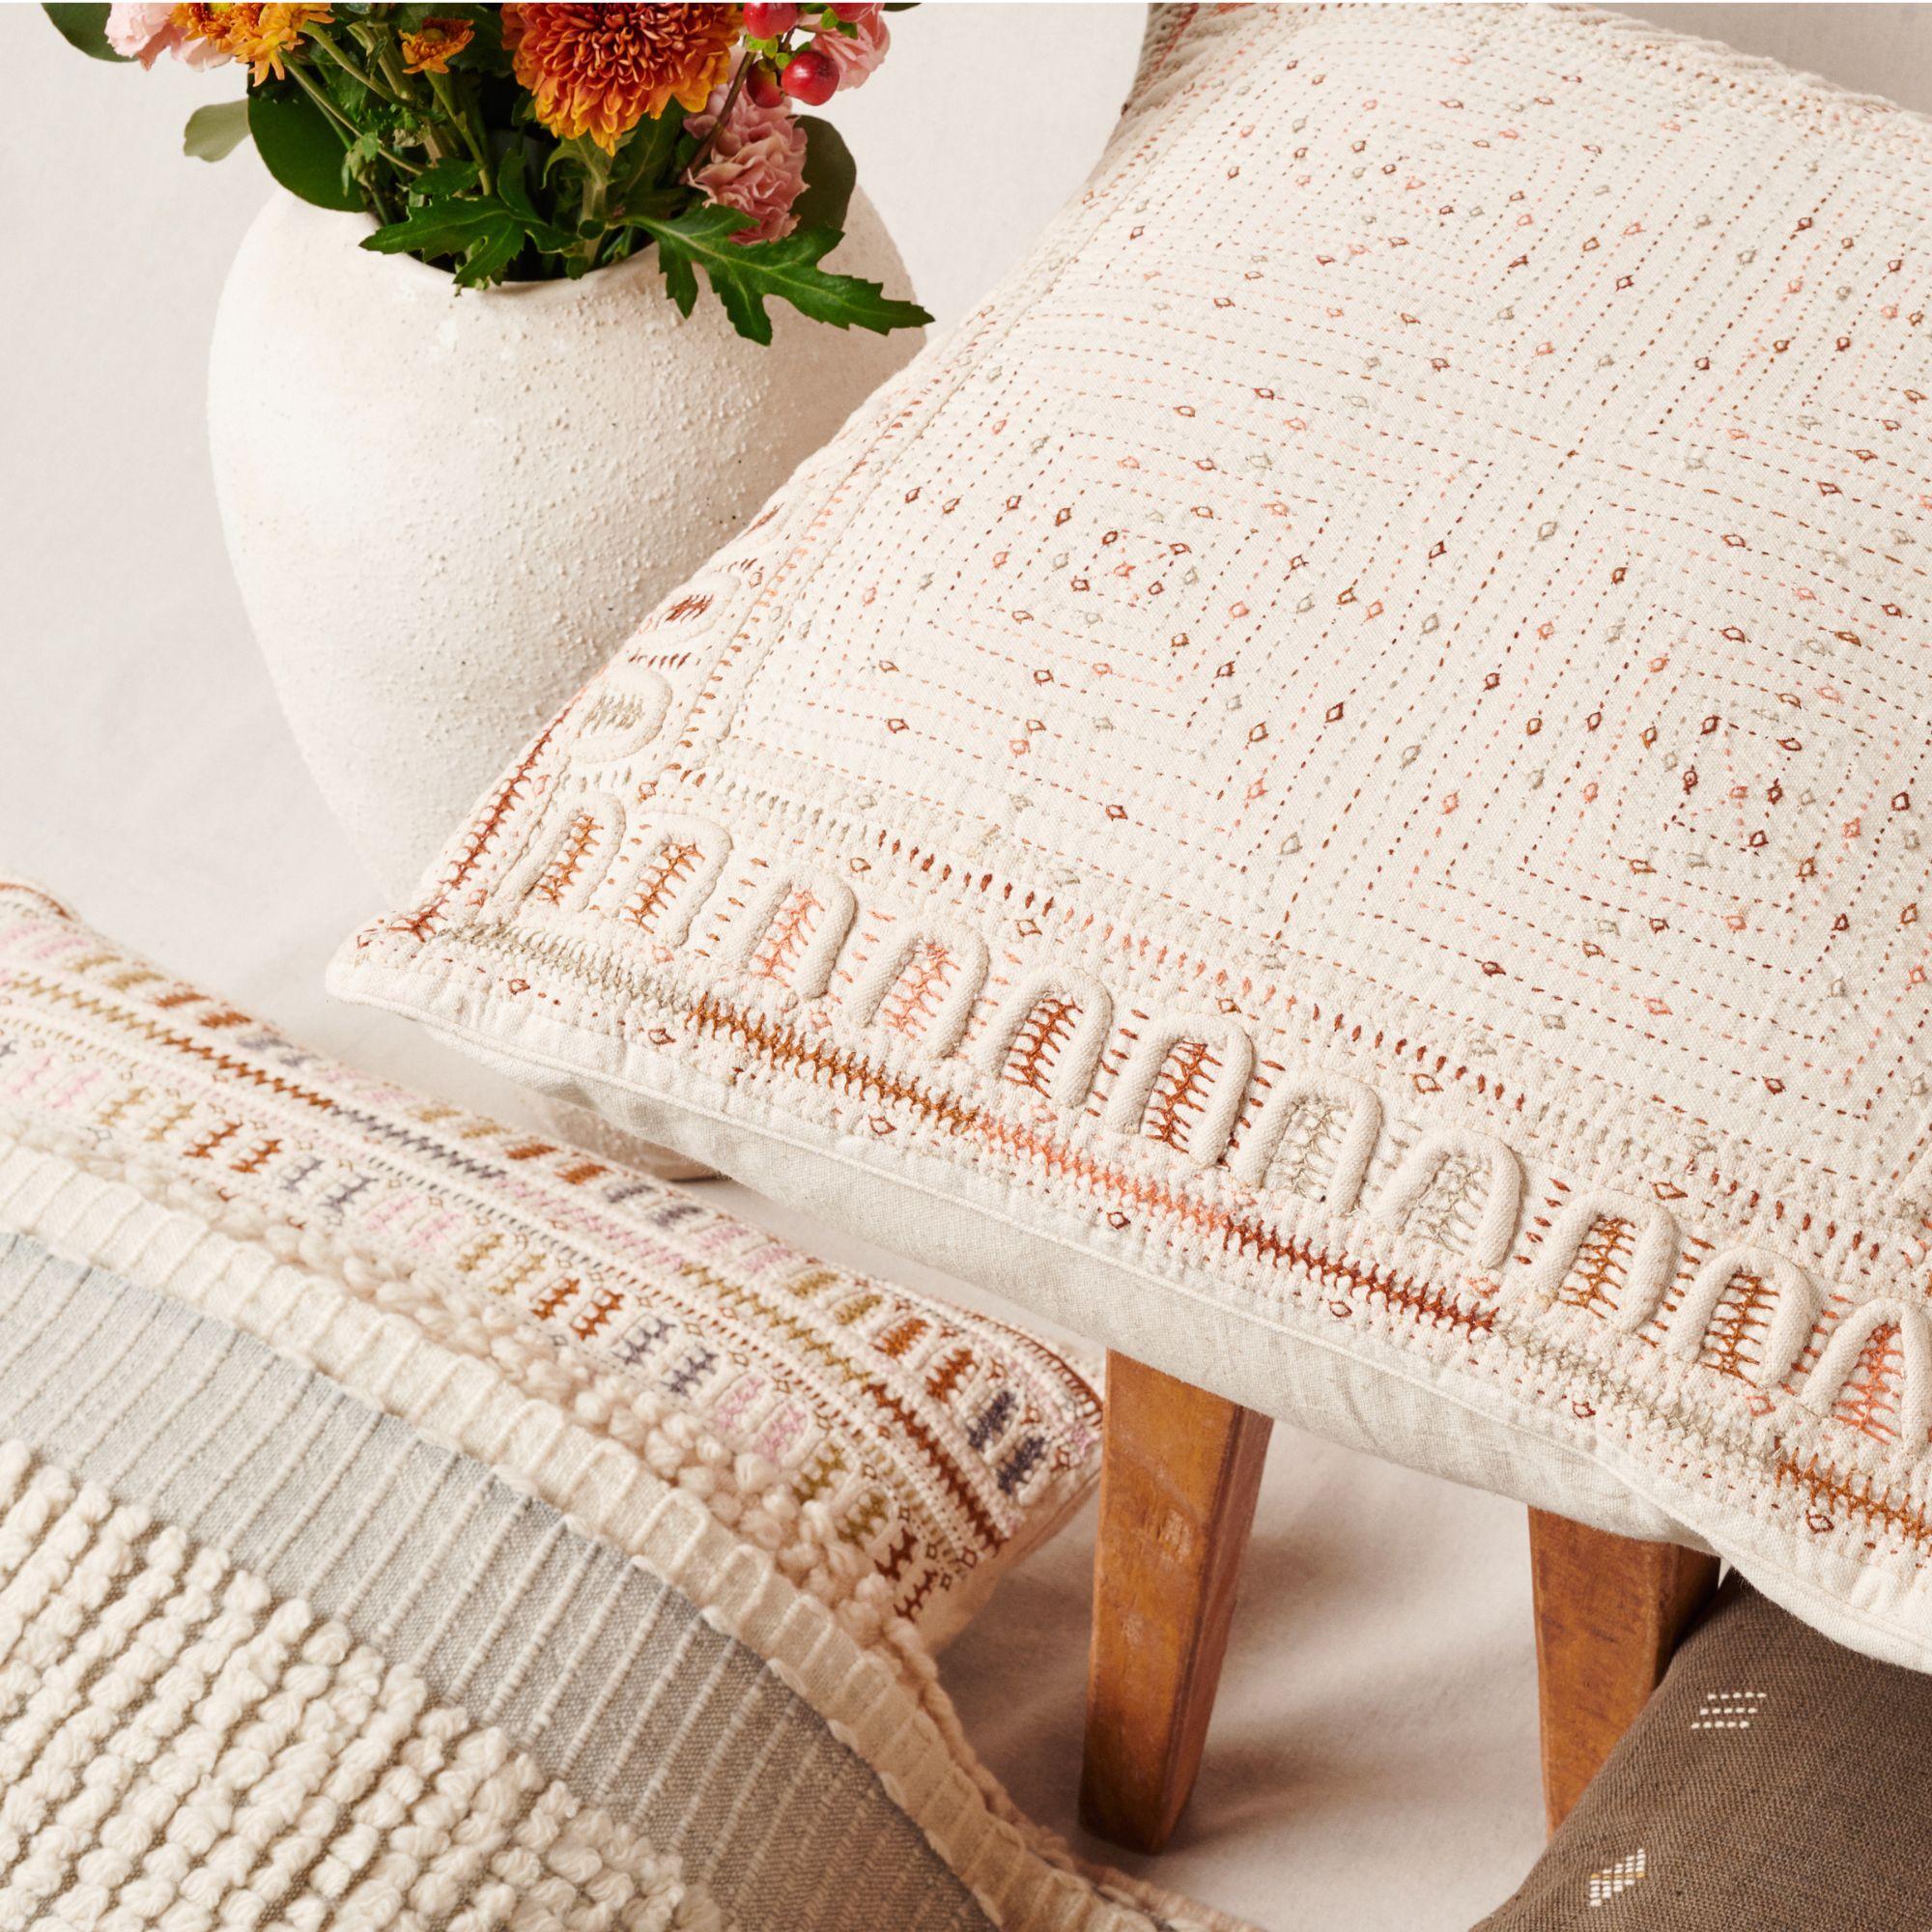 Contemporary Maze Coral Pillow Fully Hand Embroidered on Handwoven Organic Cotton by Artisans For Sale